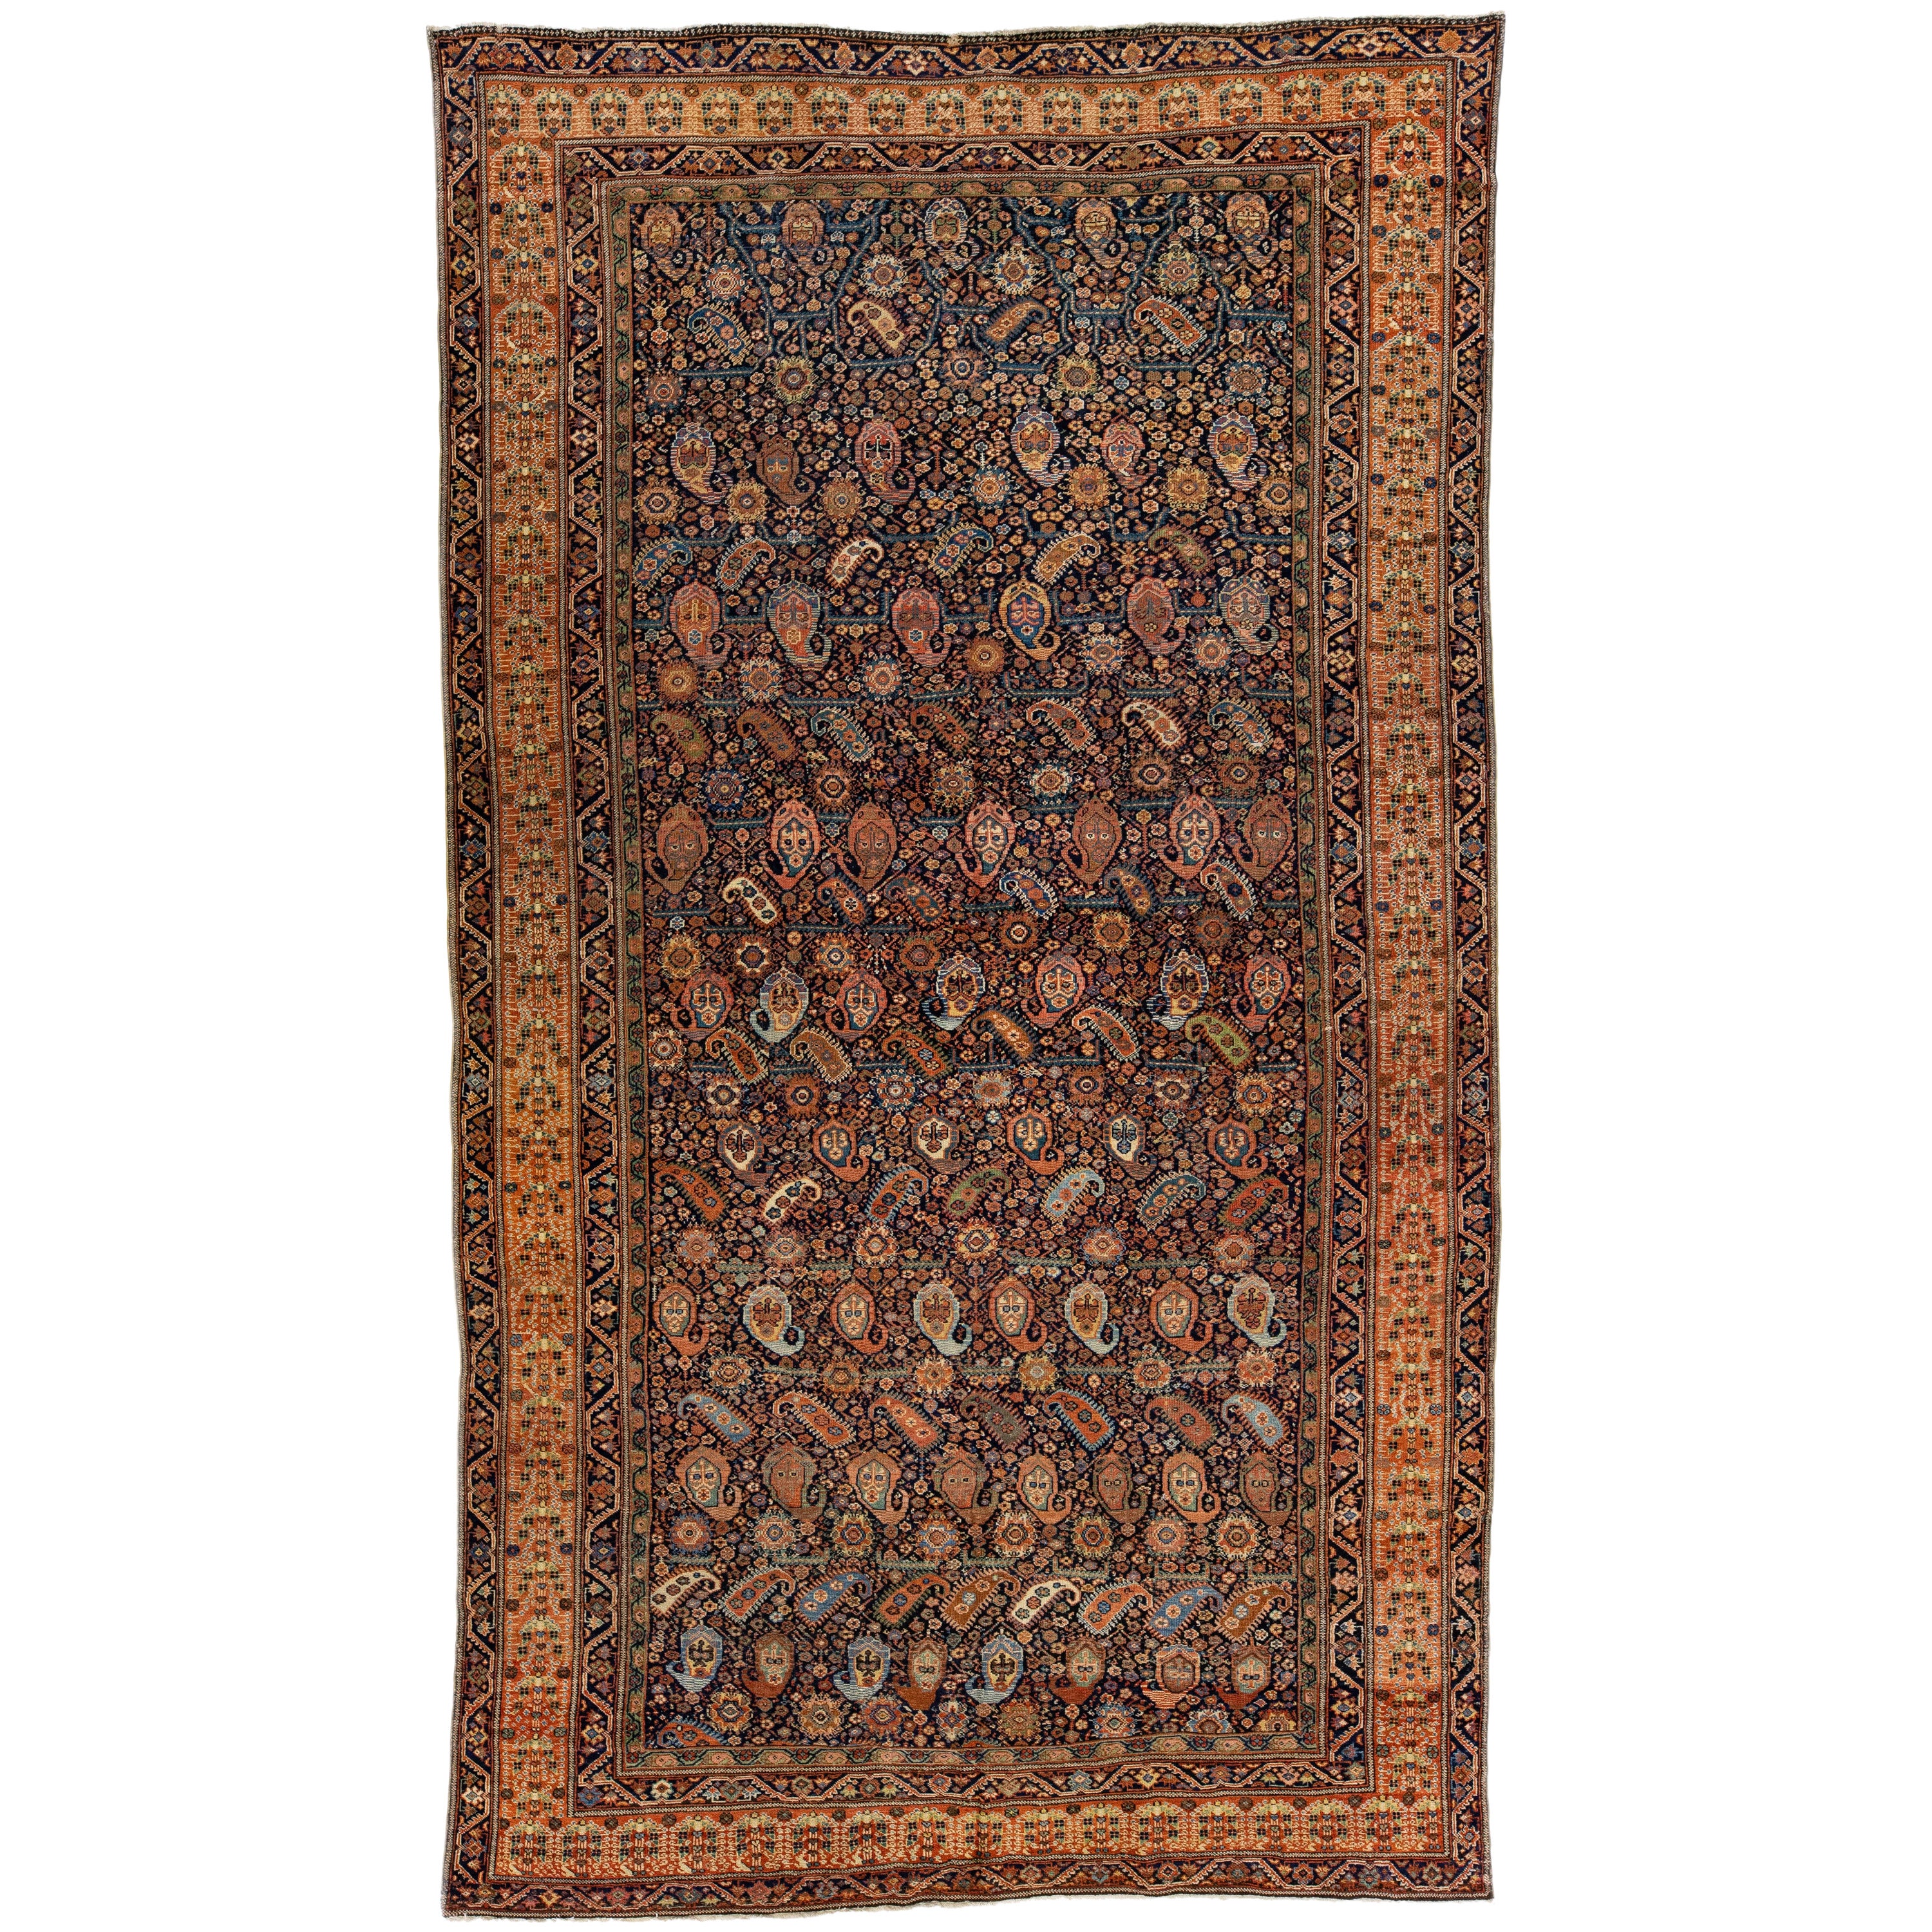 Multicolor Antique Farahan Persian Wool Rug with Boteh Motif For Sale